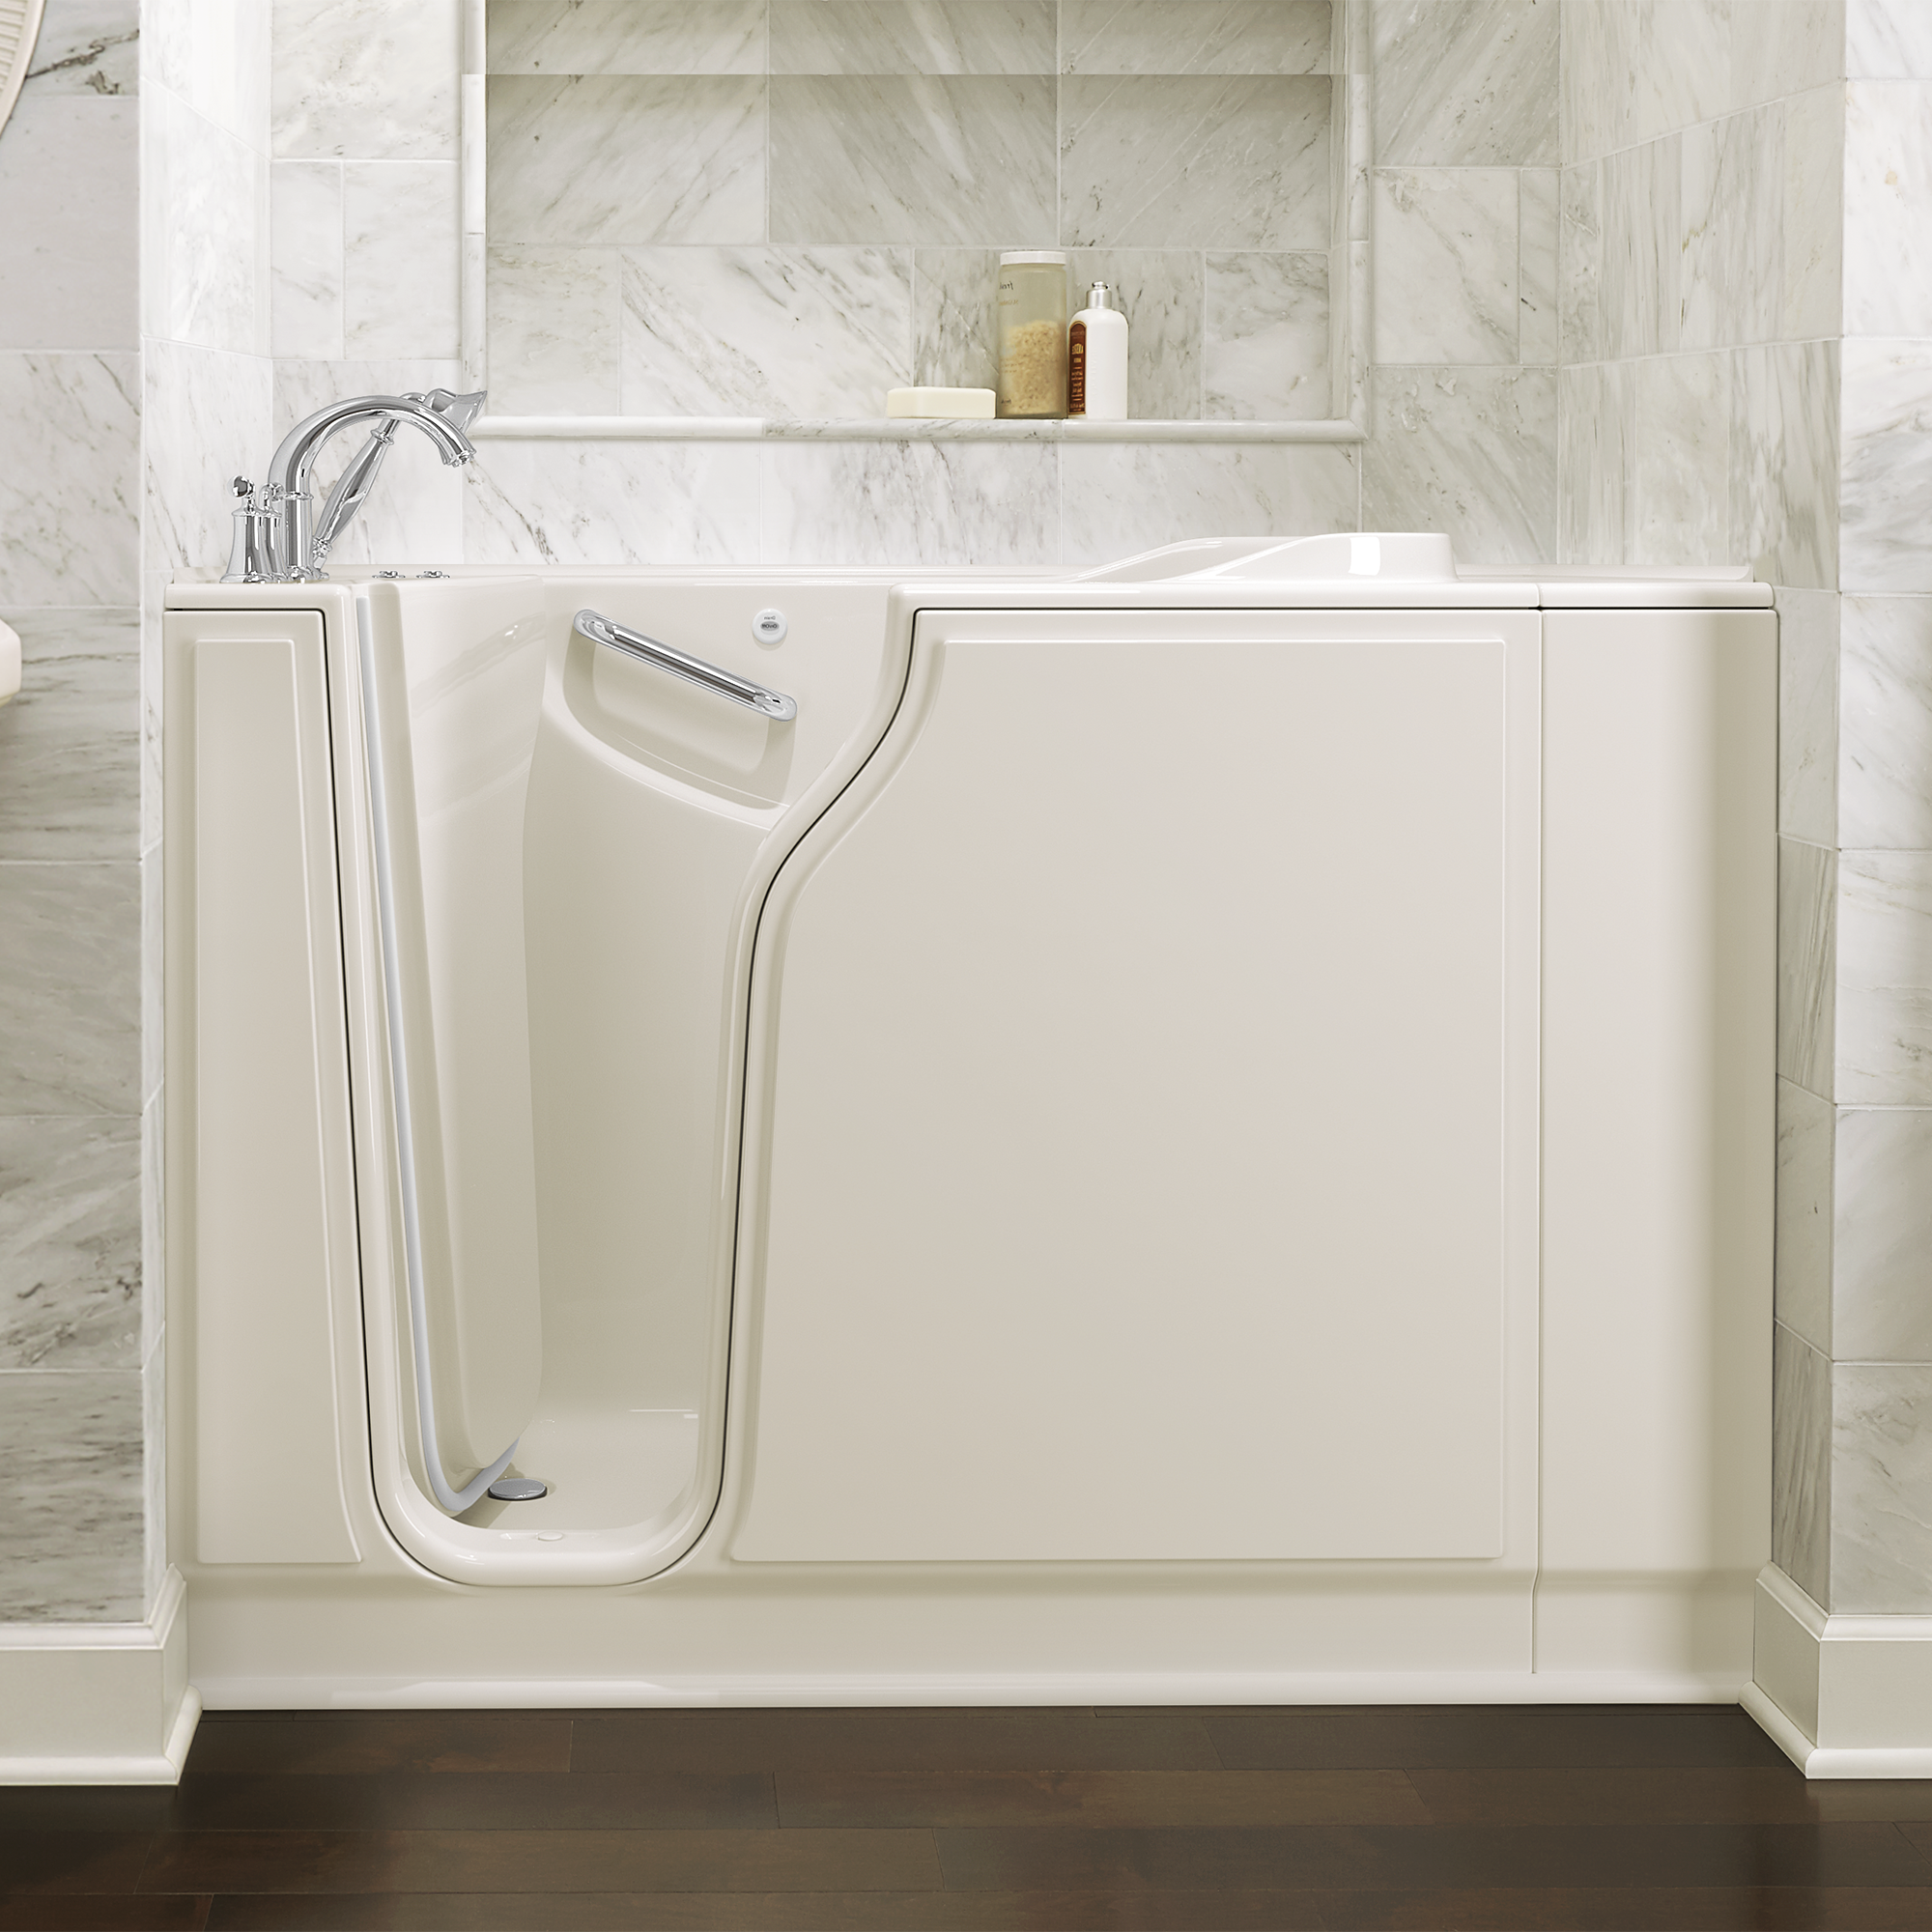 Gelcoat Value Series 30x52 Inch Walk-In Bathtub with Combination Air Spa and Whirlpool Massage System - Left Hand Door and Drain